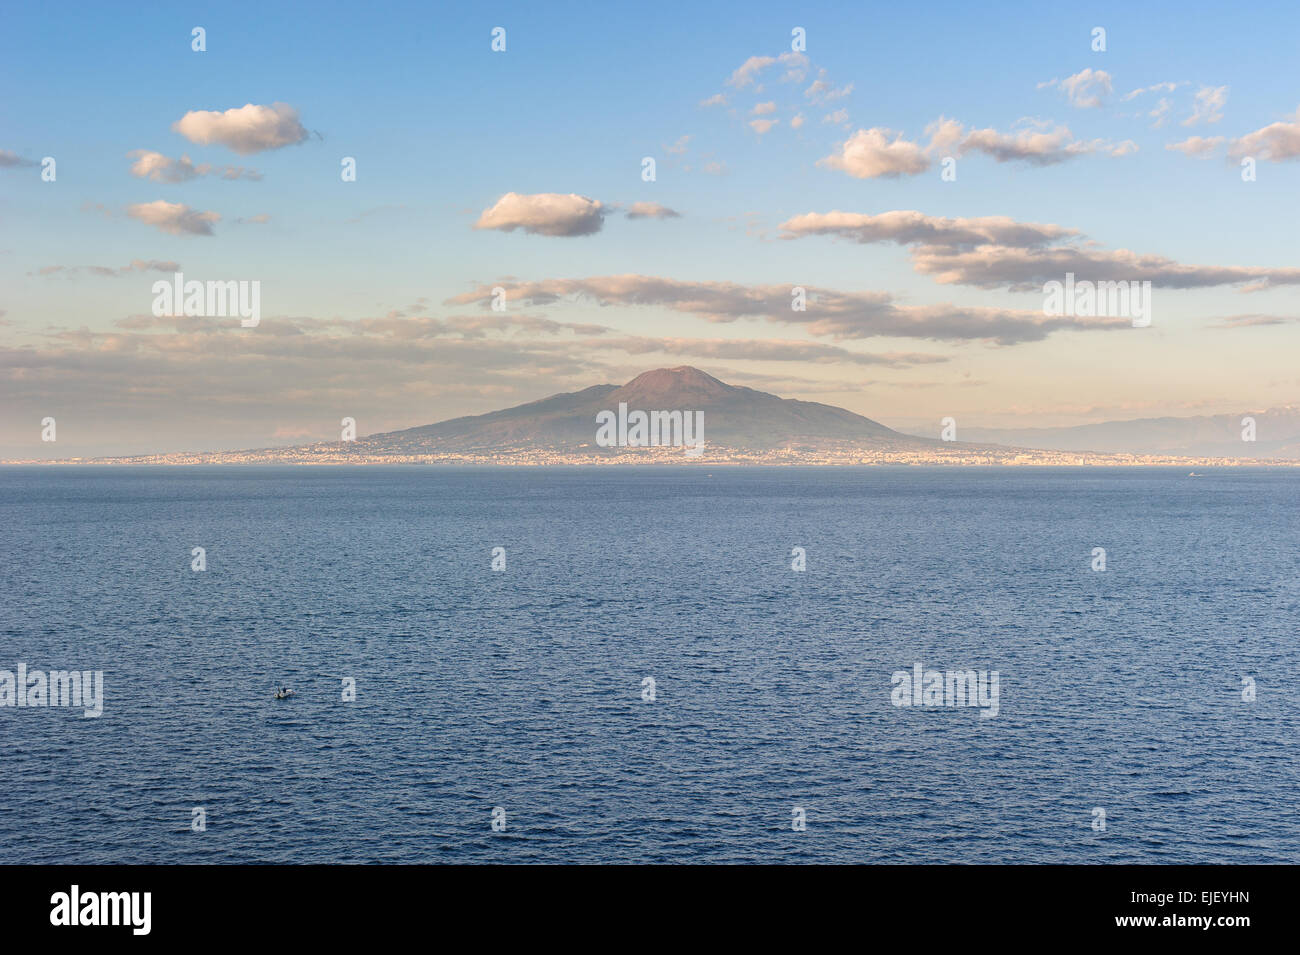 Mount Vesuvius (Monte Vesuvio in Italian) is a somma volcano in the east of Naples, Italy. The images is view from amalfi coast. Stock Photo